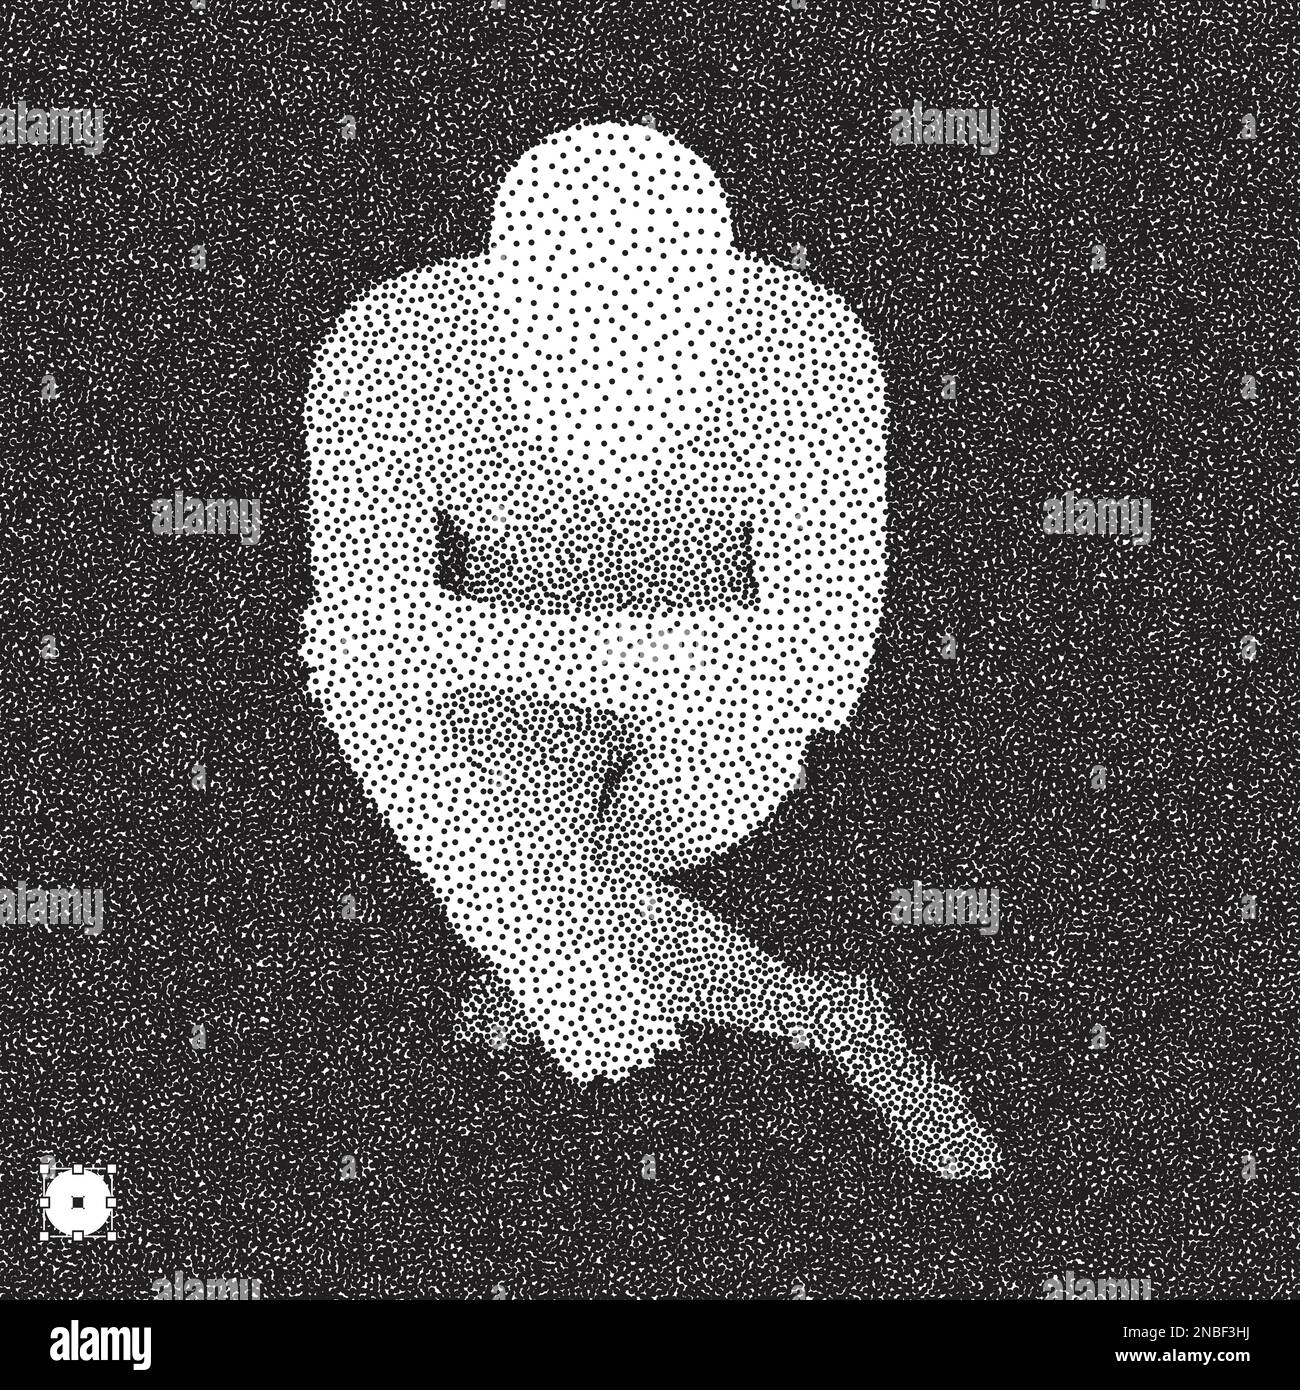 Black and white grainy dotwork design. Pointillism pattern with optical illusion. Stippled vector illustration. Stock Vector